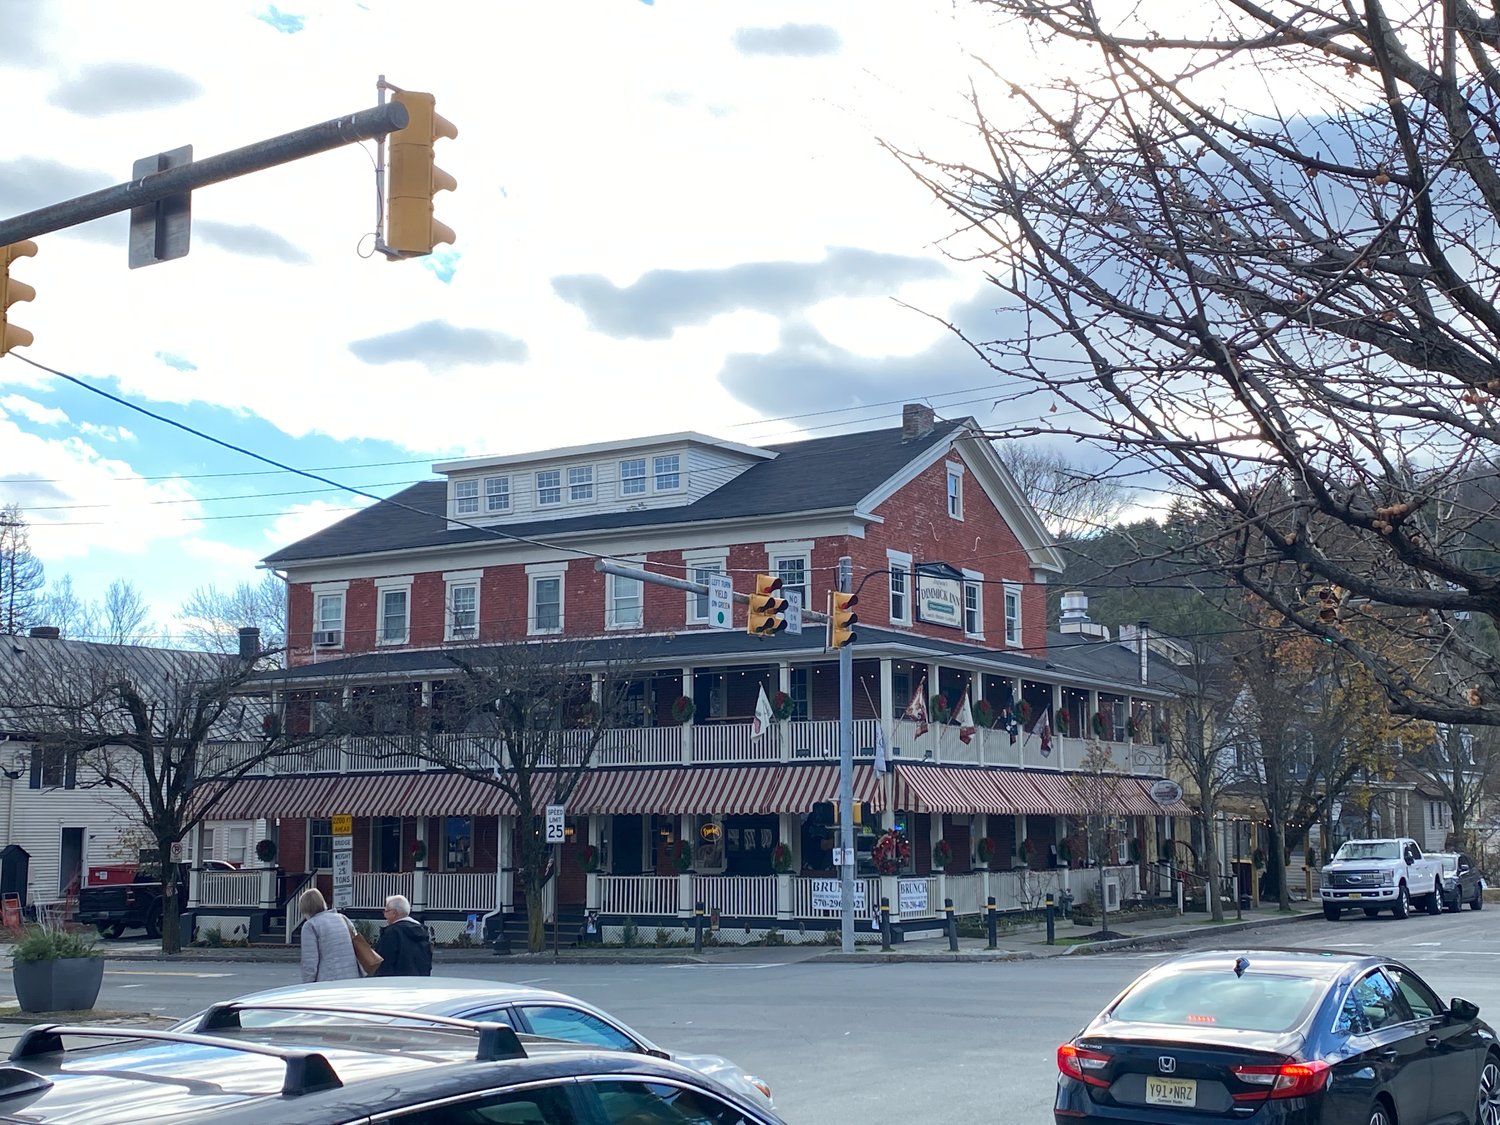 The Dimmick Inn anchors Milford's business district.